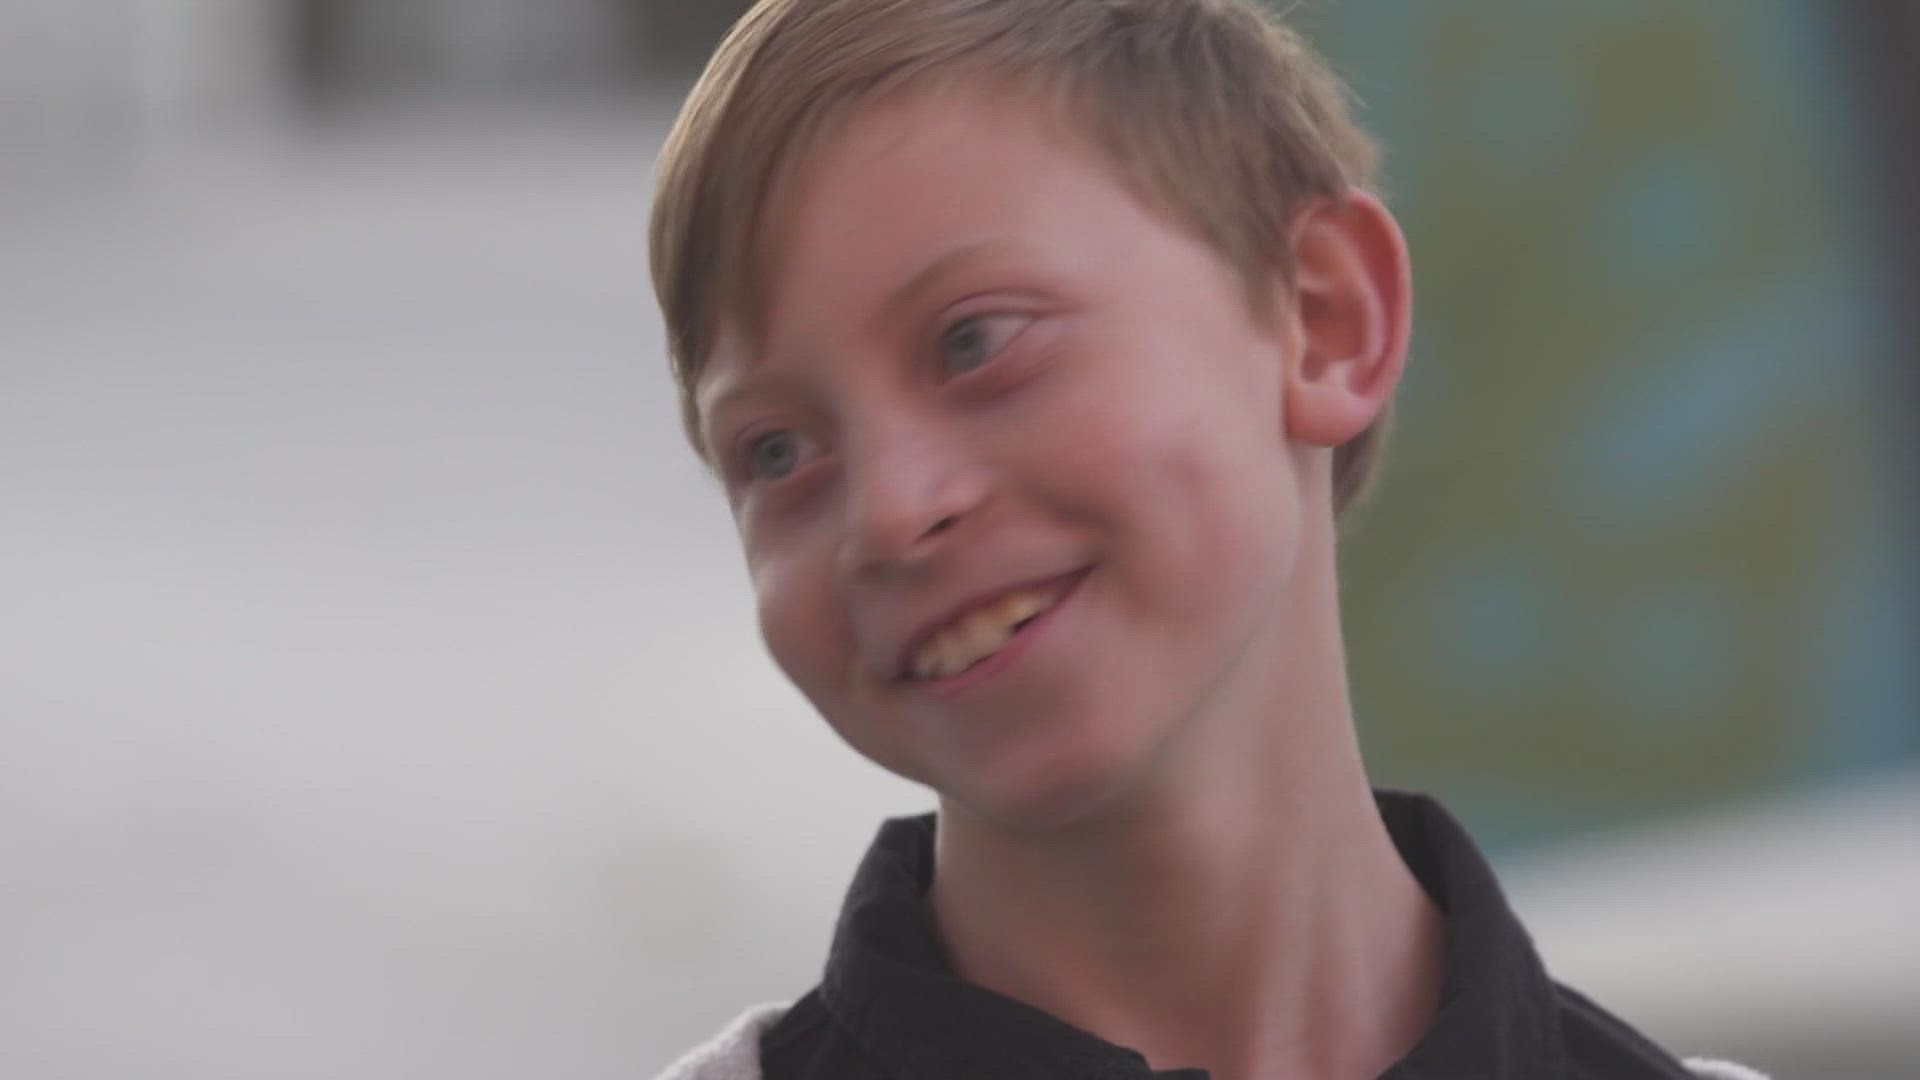 If you've ever napped in church, 10-year-old Evan has a story for you! His honesty and pure heart will melt yours.